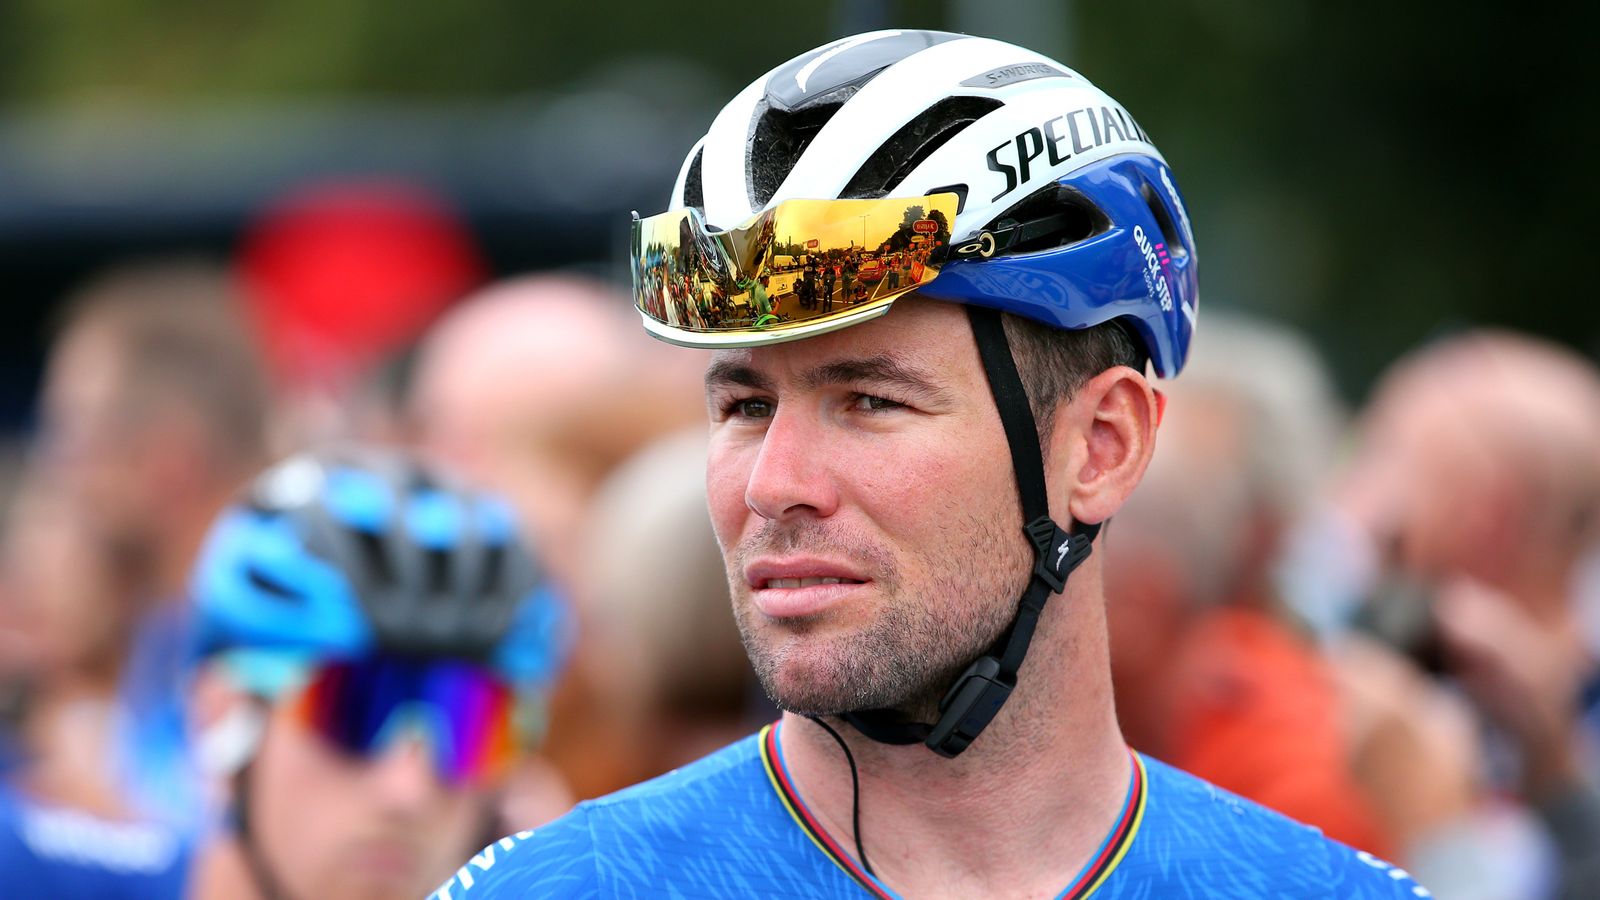 Mark Cavendish subjected to knifepoint theft whereas at dwelling with household, courtroom informed | Biking Information